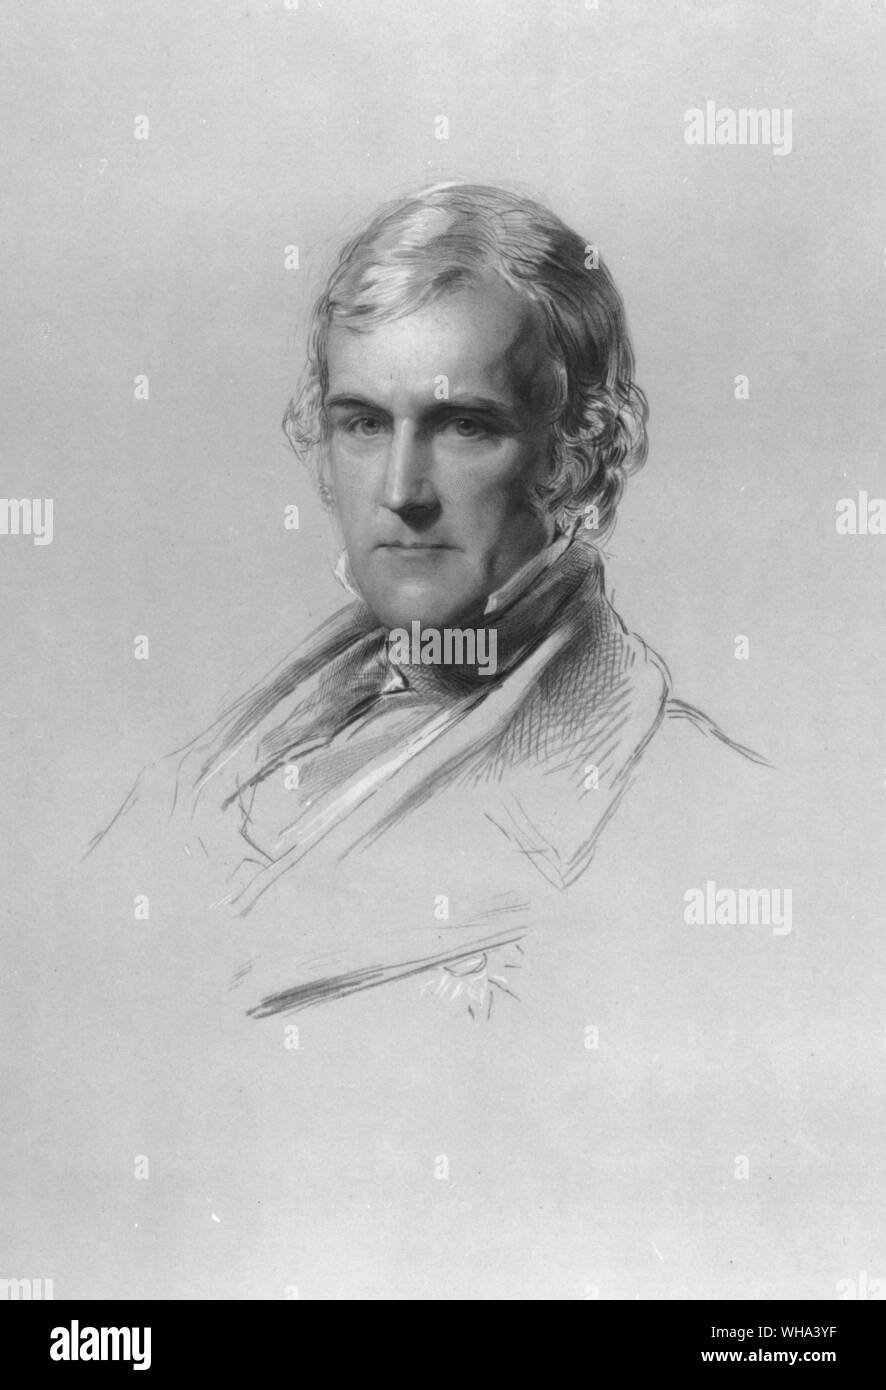 Stratford Canning, Viscount Stratford de Redcliffe (1786-1880), Diplomat . Spent most of his career as ambassador in Constantinople, exercising great influence over the Sultan and his advisers and playing a key role in the diplomatic events leading to the outbreak of the Crimean War. Although he worked to prevent it, he thought war inevitable in the long run. . . Stock Photo